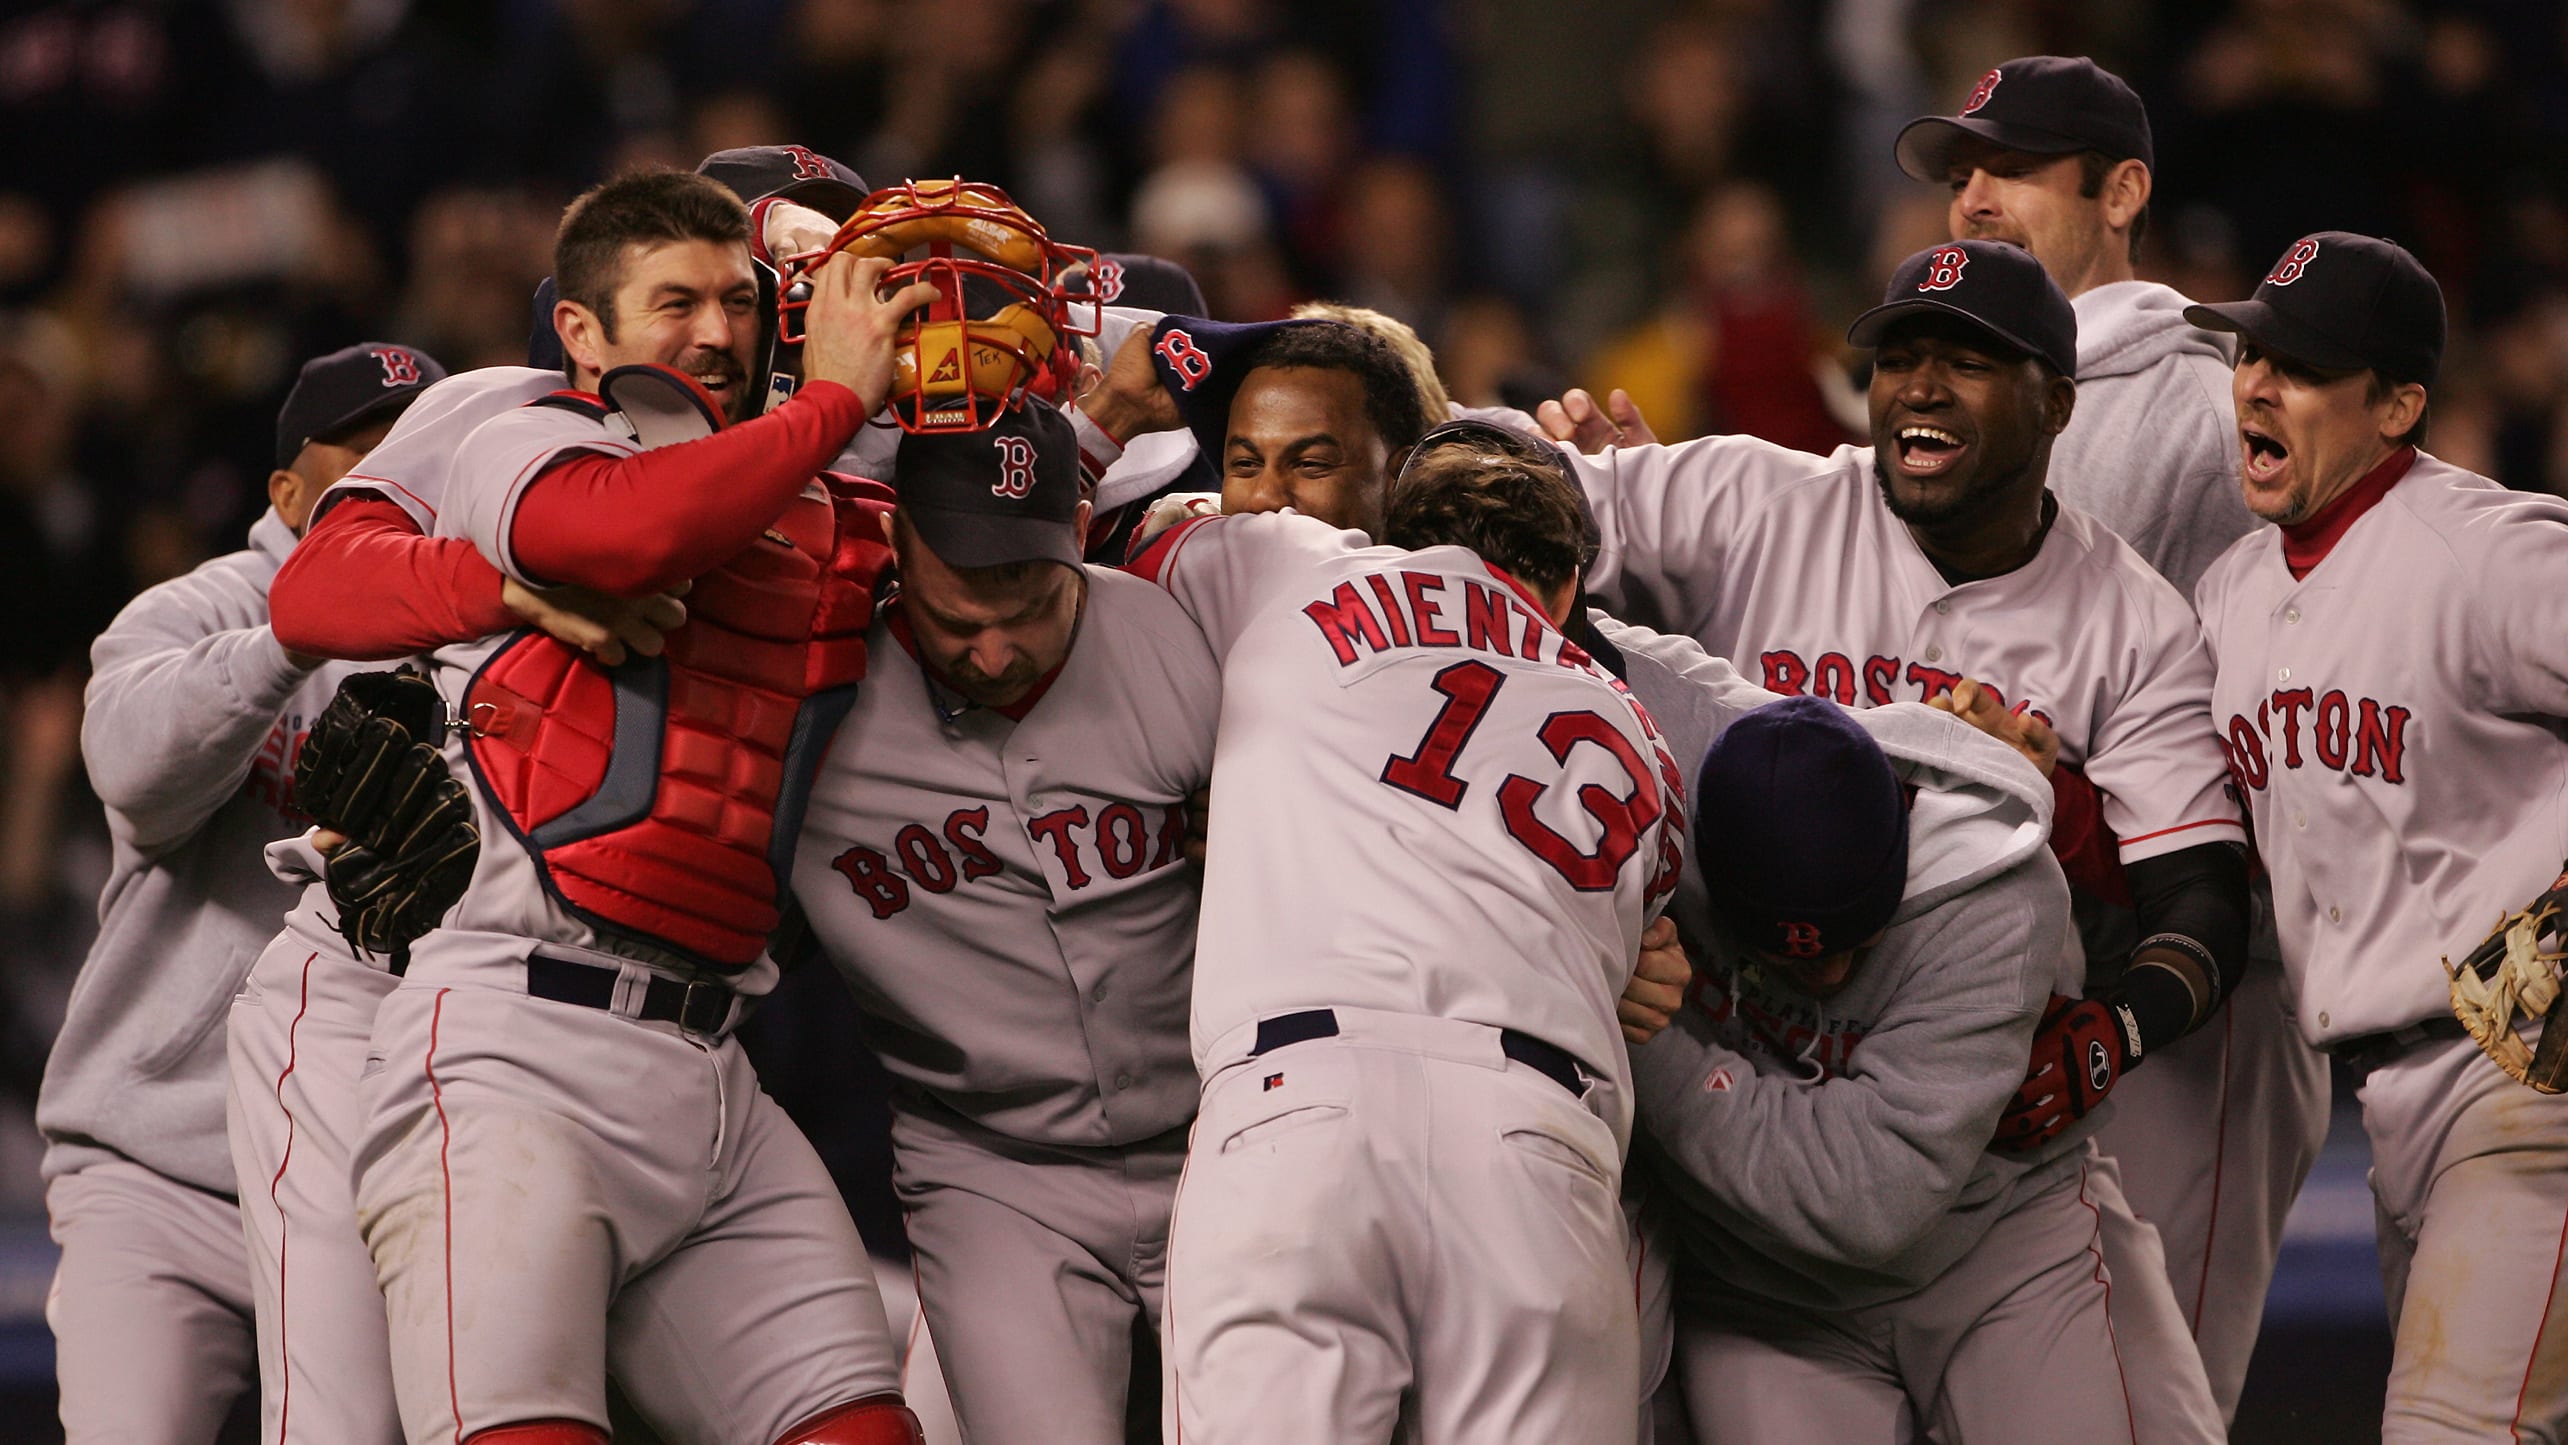 The Red Sox celebrate after winning the 2004 ALCS.